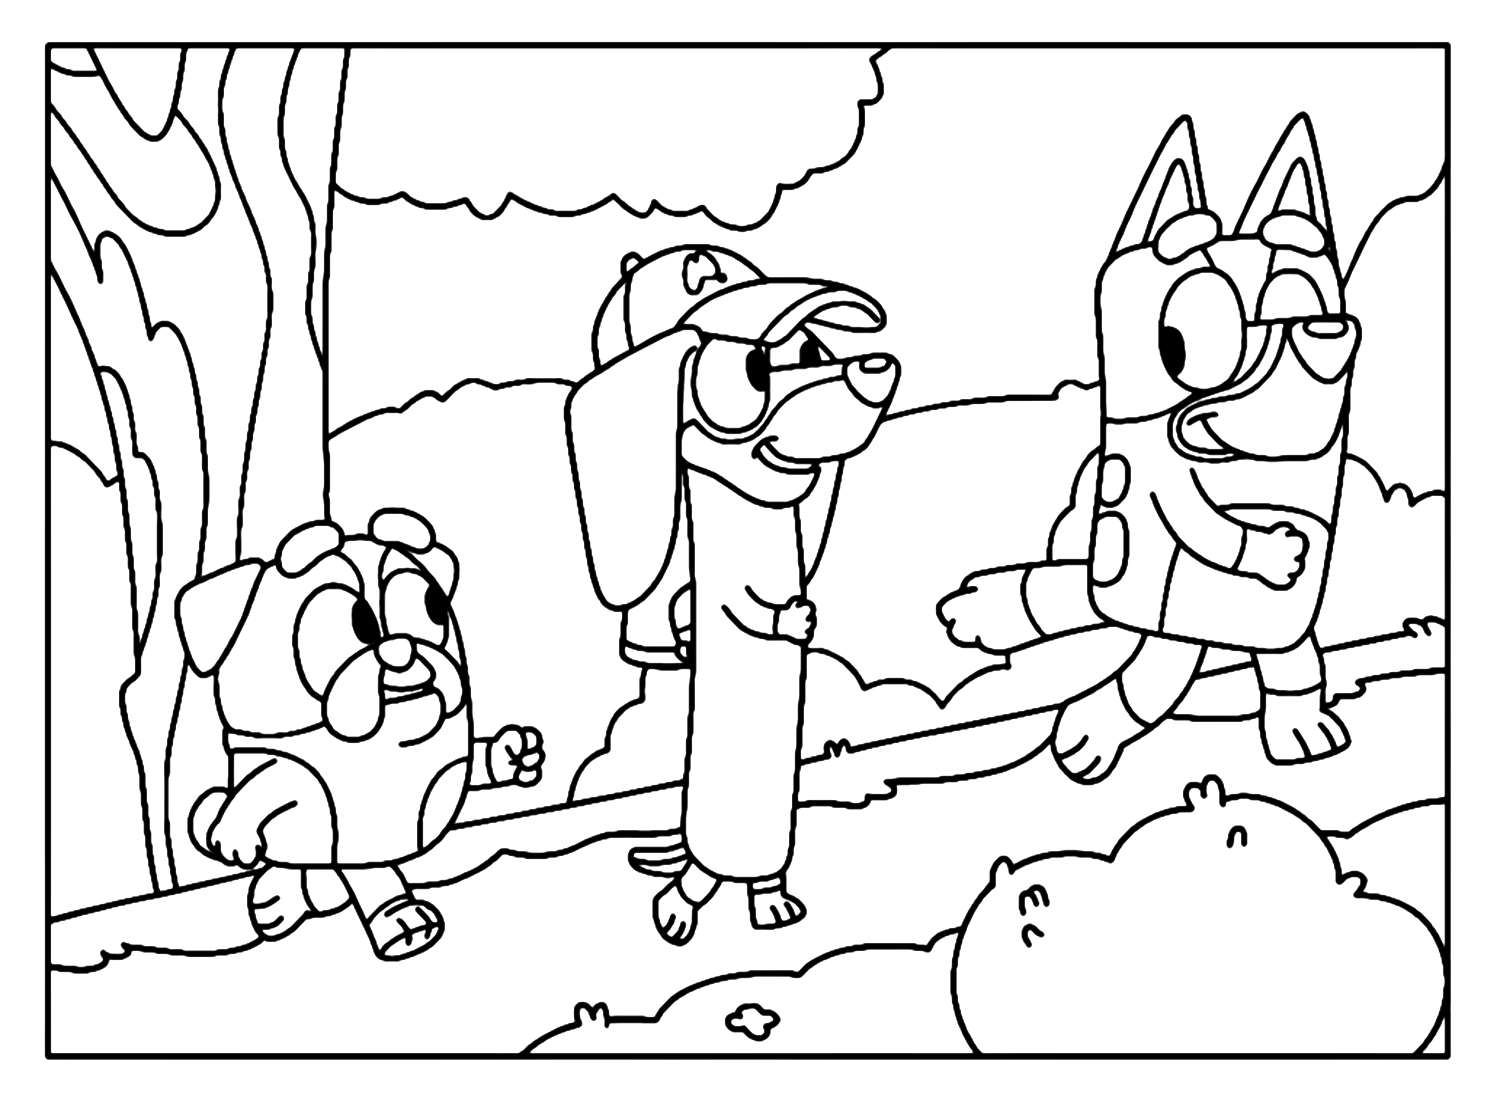 Bluey With Snickers And Winton Coloring Pages